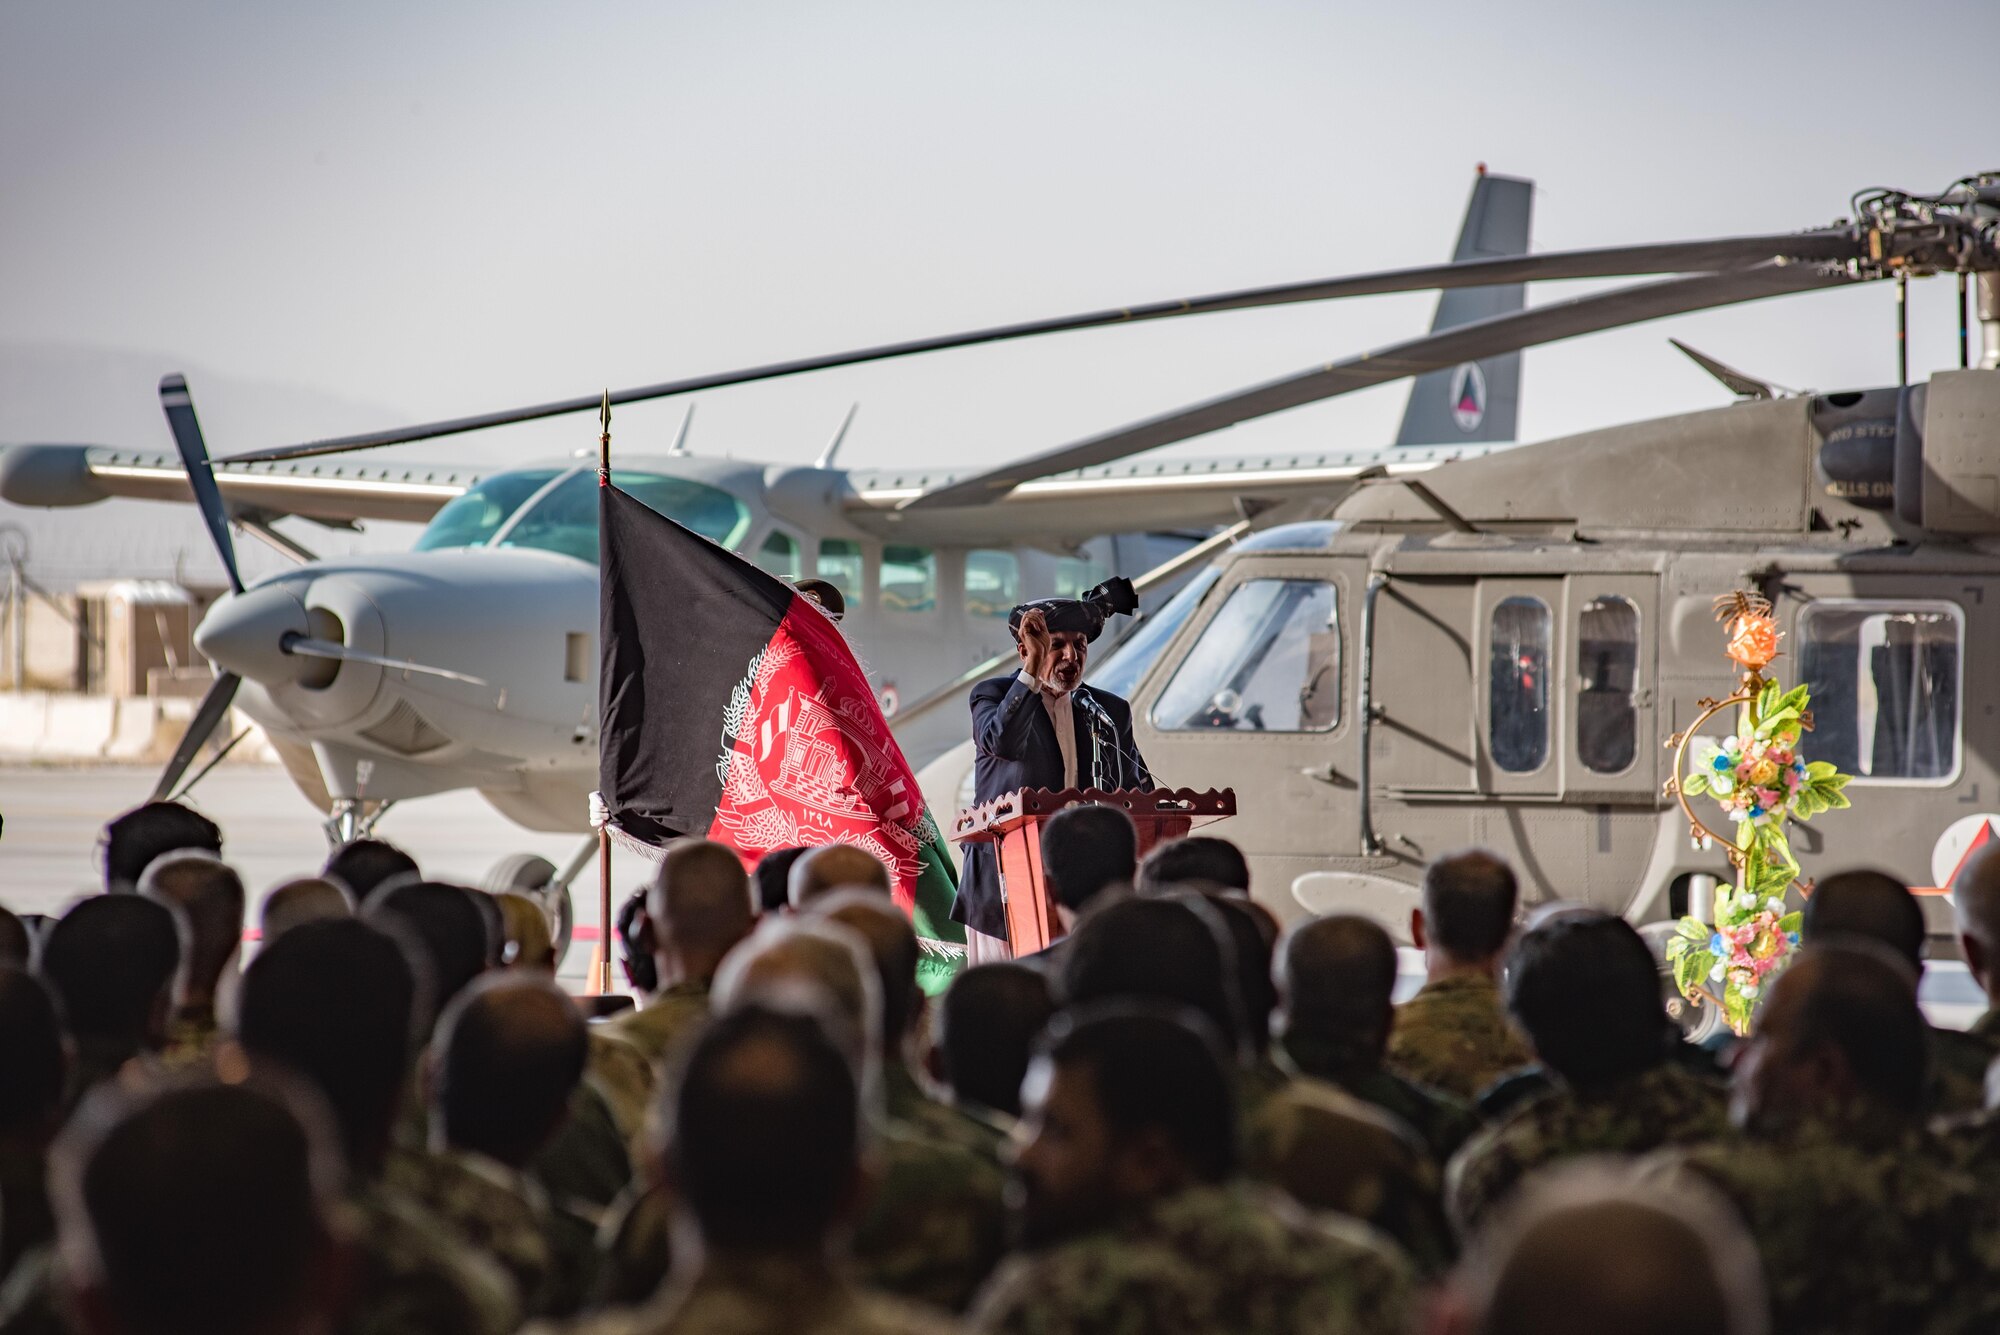 Afghanistan President Ashraf Ghani speaks during the official UH-60 Black Hawk arrival ceremony, Oct. 7, 2017, at Kandahar Airfield, Afghanistan. Ghani and U.S. Army Gen. John W. Nicholson, commander of the Resolute Support Mission and U.S. Forces − Afghanistan, performed a ceremonial ribbon cutting celebrating the newest addition to Afghanistan’s young air force fleet while vowing continued commitment to the fight against the anti-government insurgency in Afghanistan. (U.S. Air Force photo by Staff Sgt. Alexander W. Riedel)